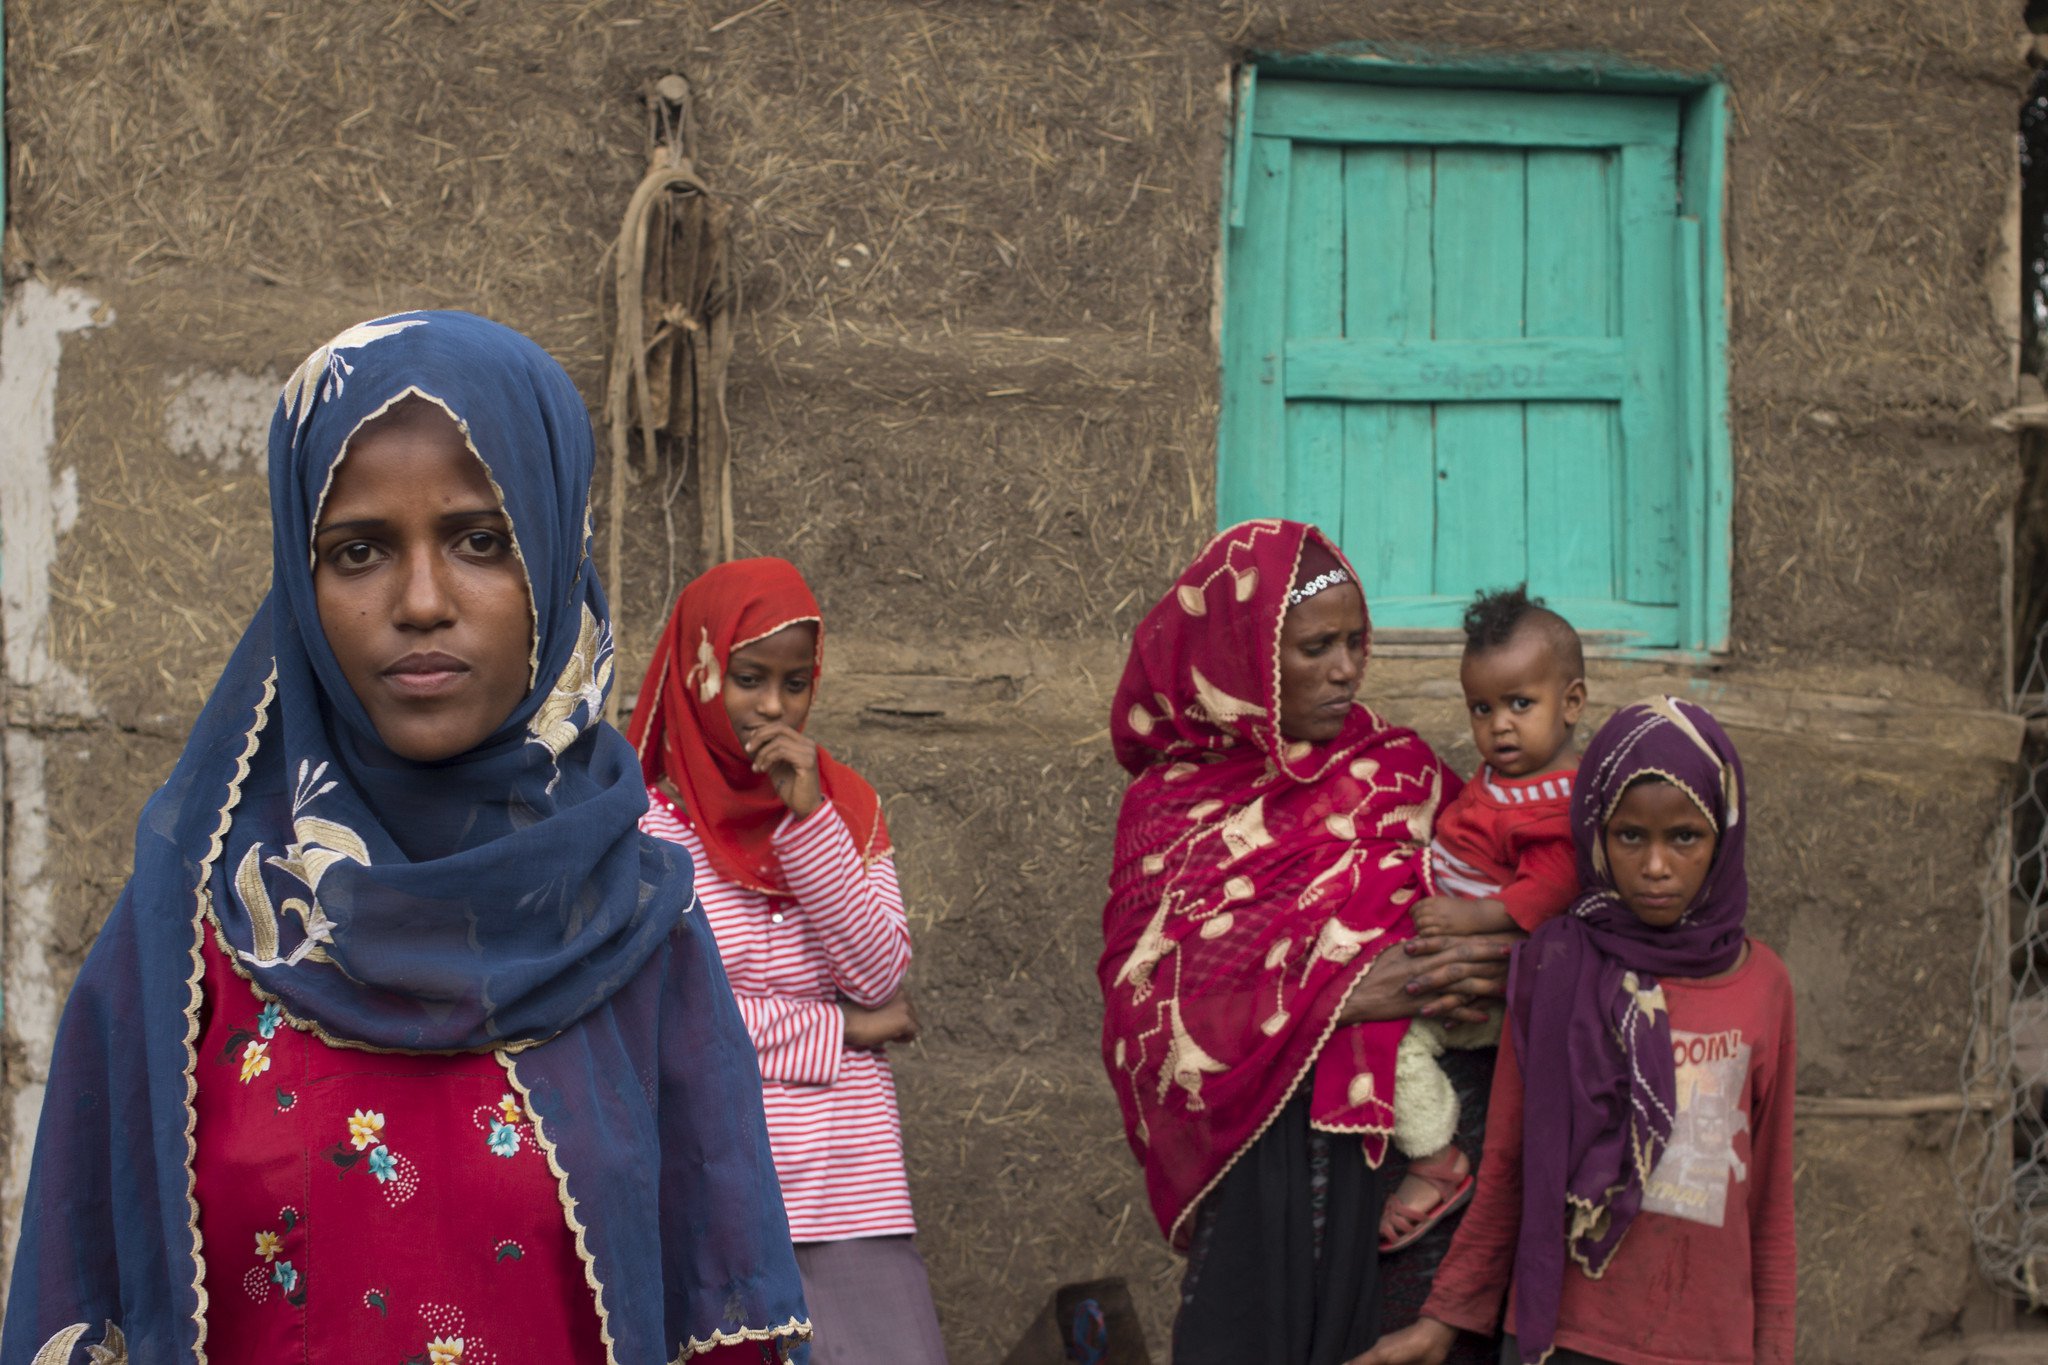 A girl and the family she supported with her earnings in Saudi Arabia following an early marriage. The family now live in Hara, Amhara Region, Ethiopia